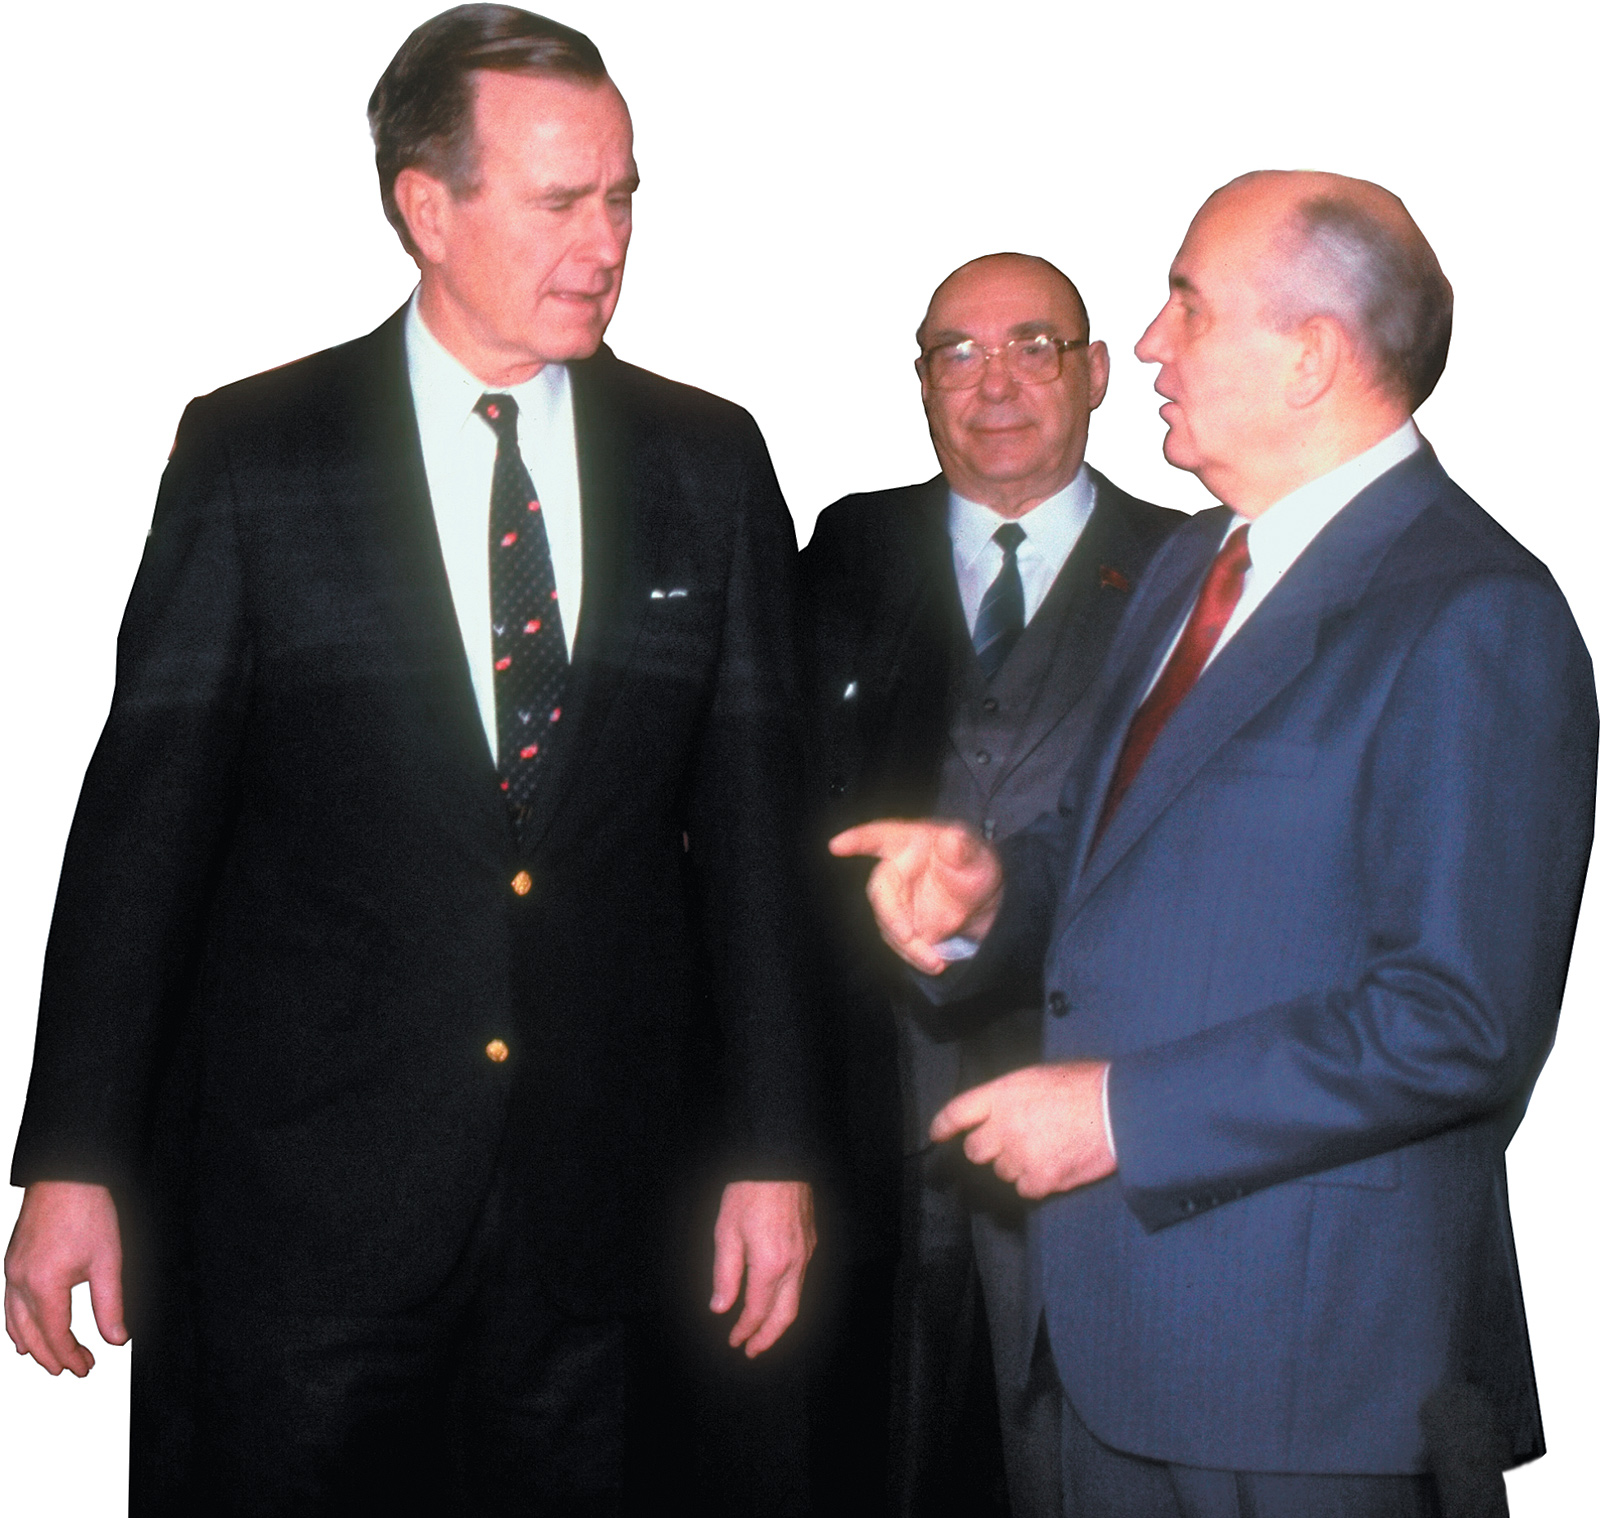 Alexander Yakovlev (center) with George H.W. Bush and Mikhail Gorbachev at their summit meeting in Malta, December 1989